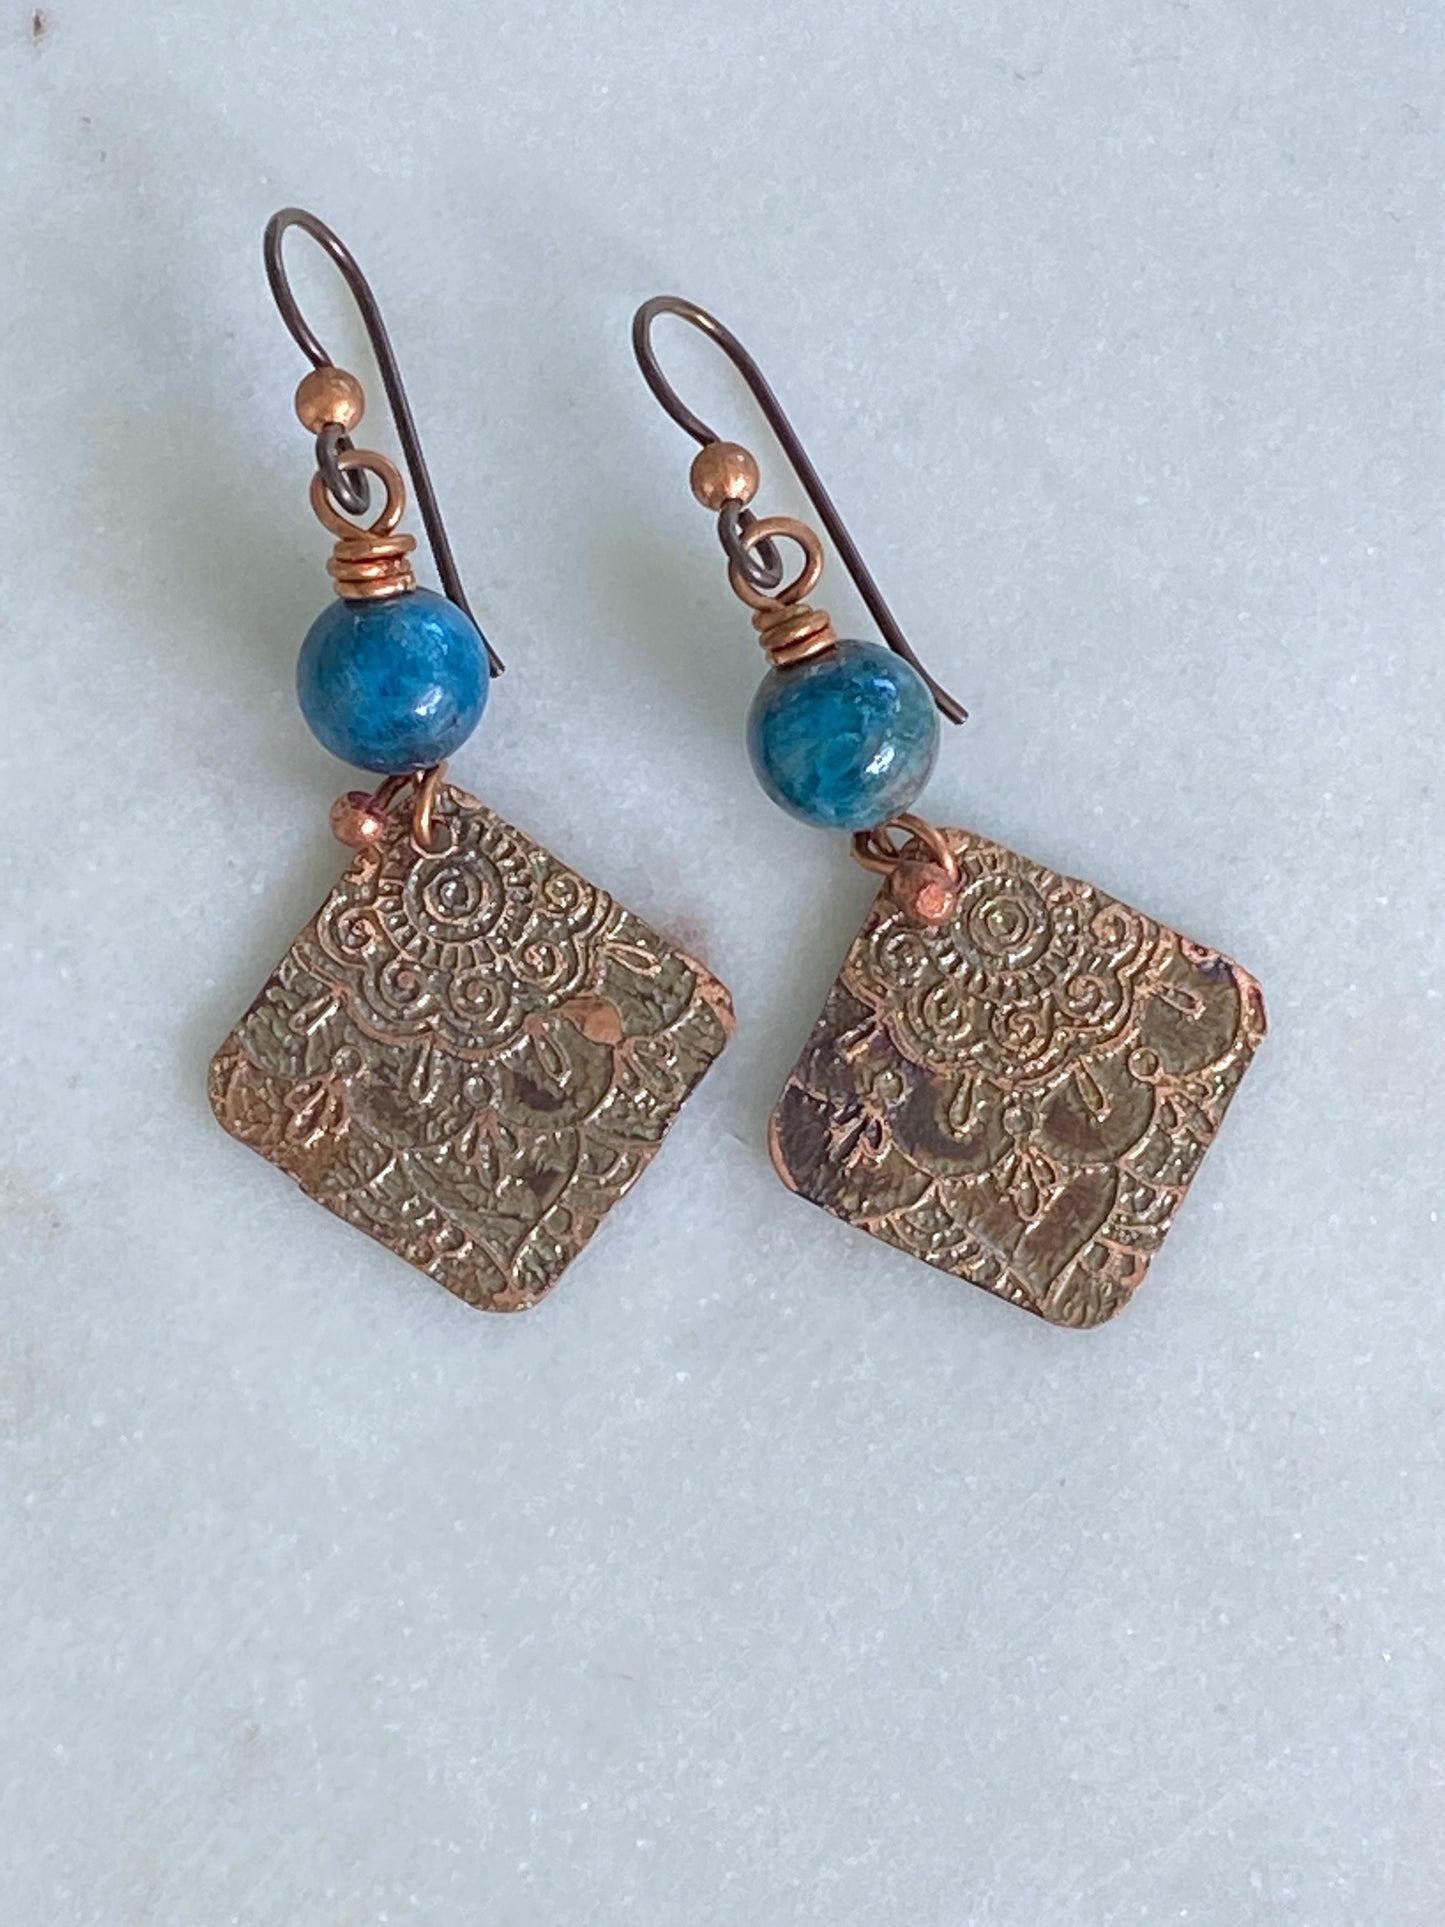 Acid etched copper mandala earrings with apatite